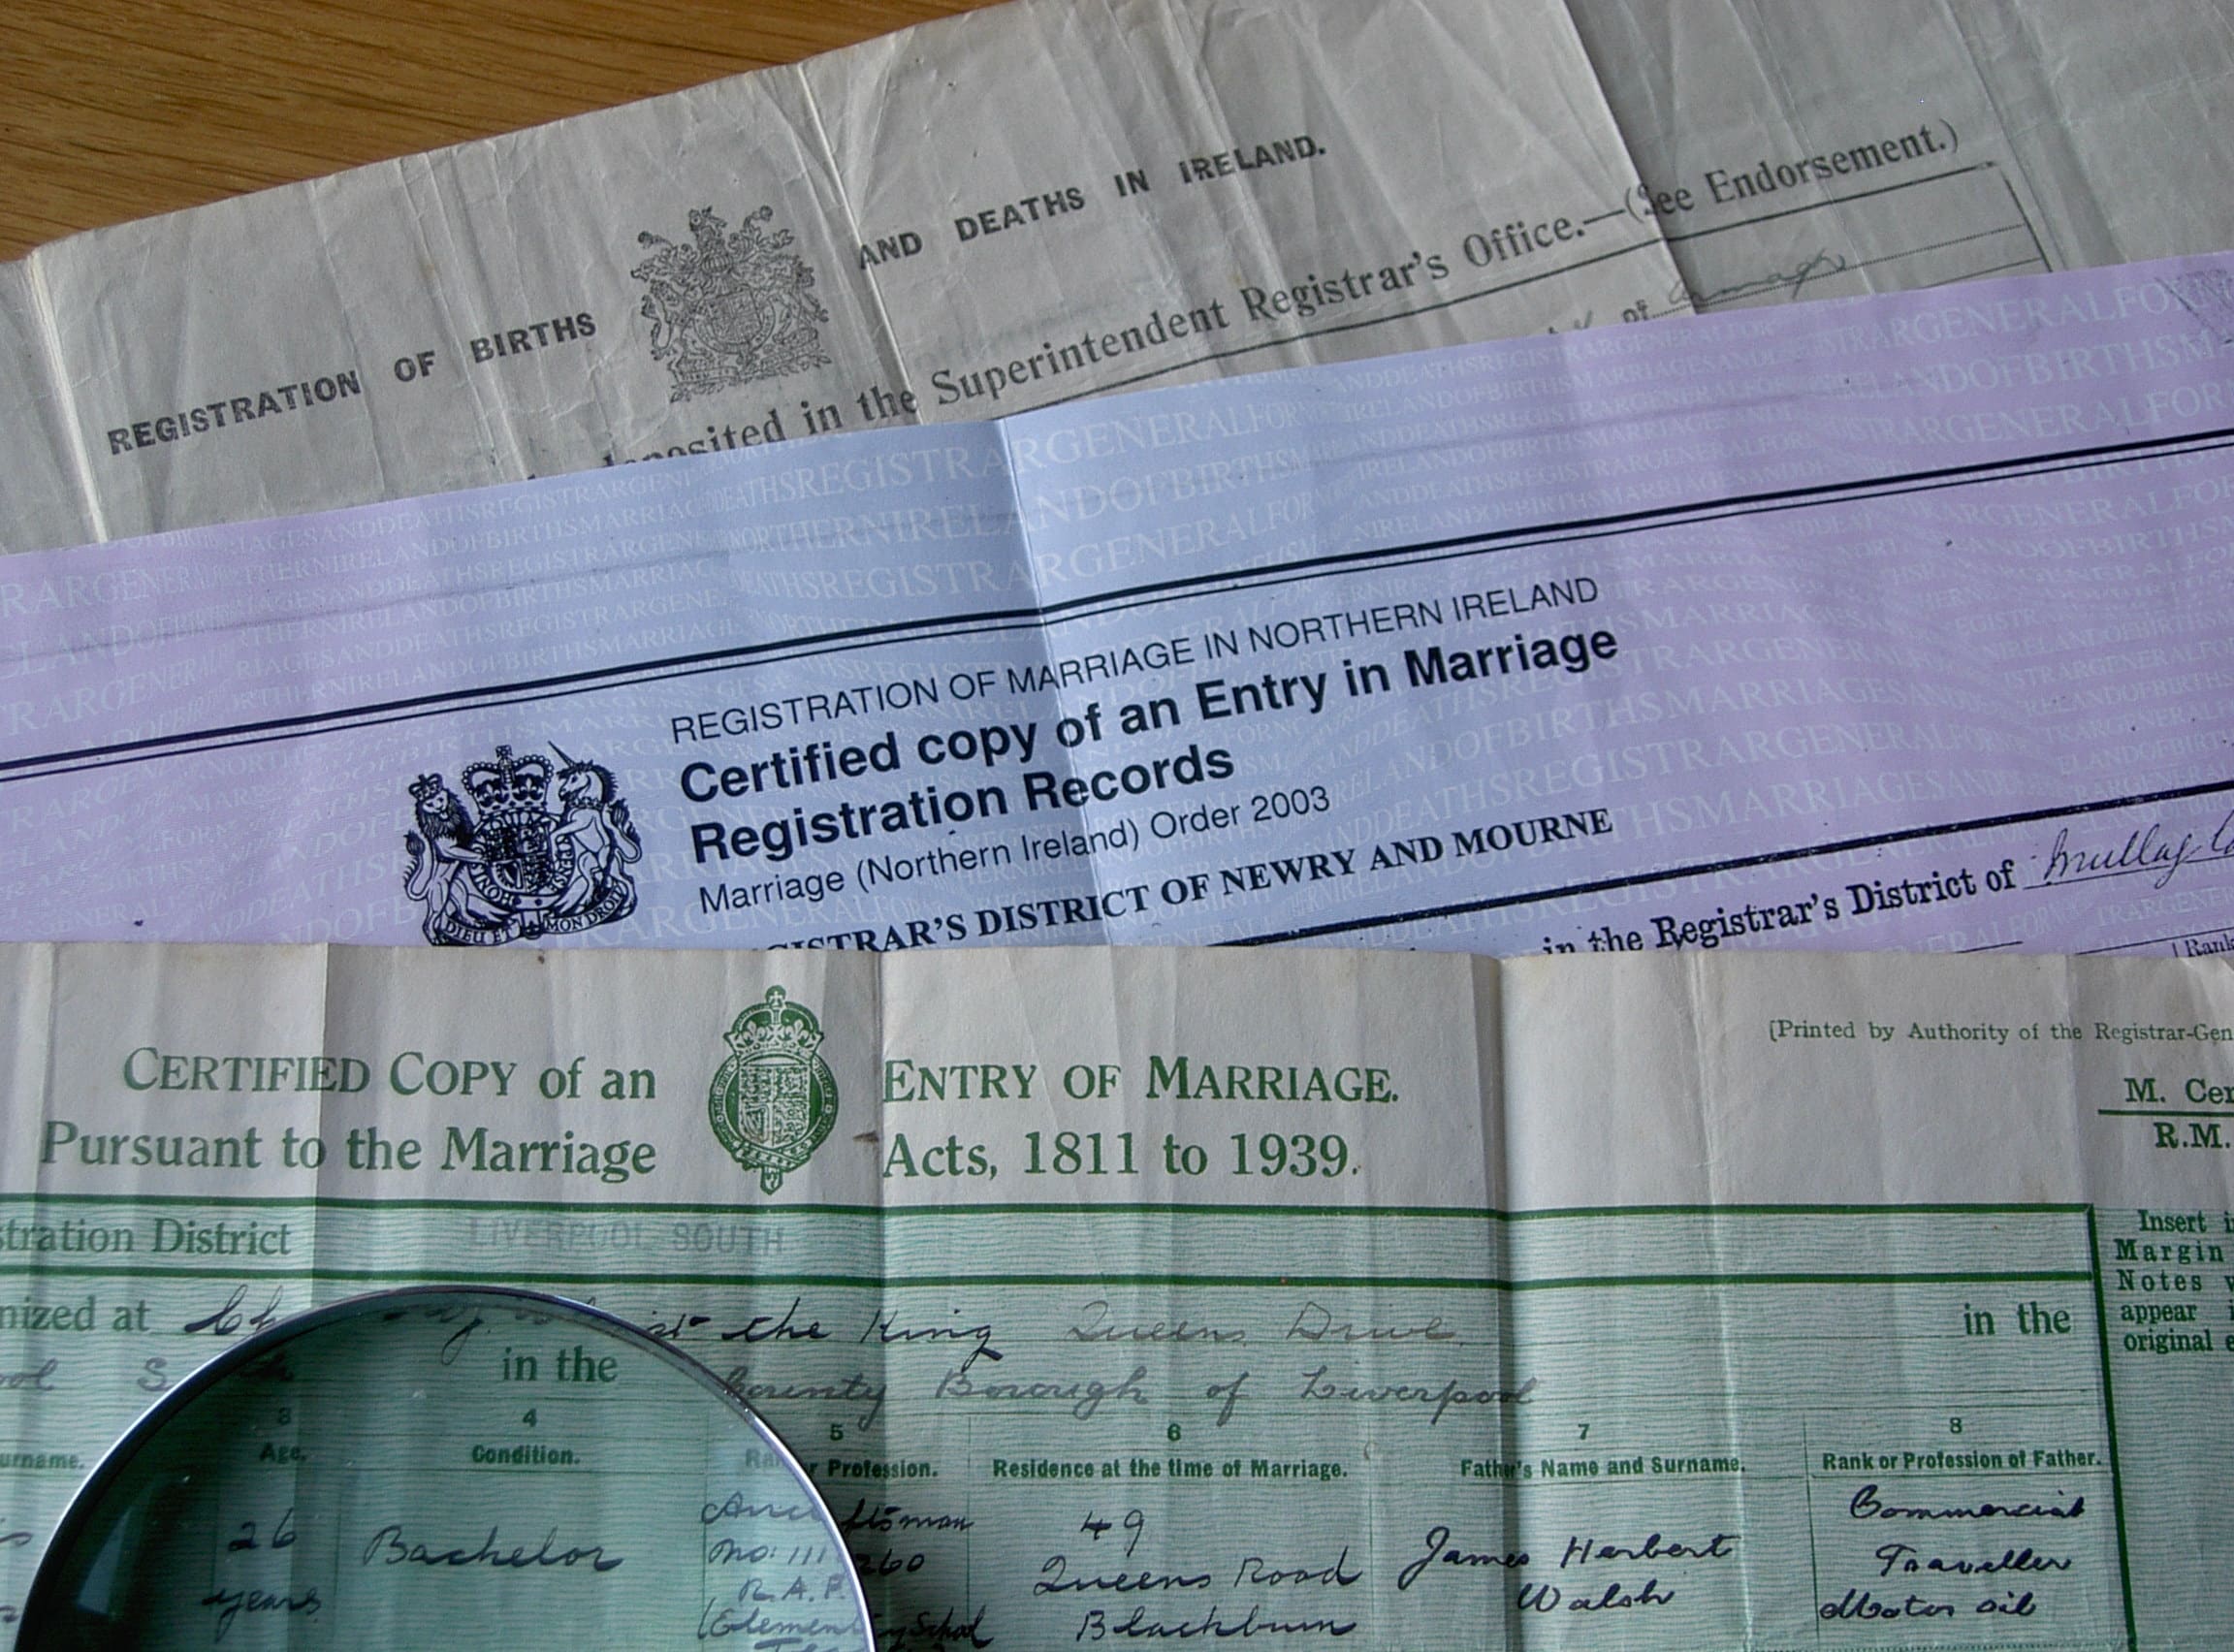 Birth, marriage and death civil registration Certificates